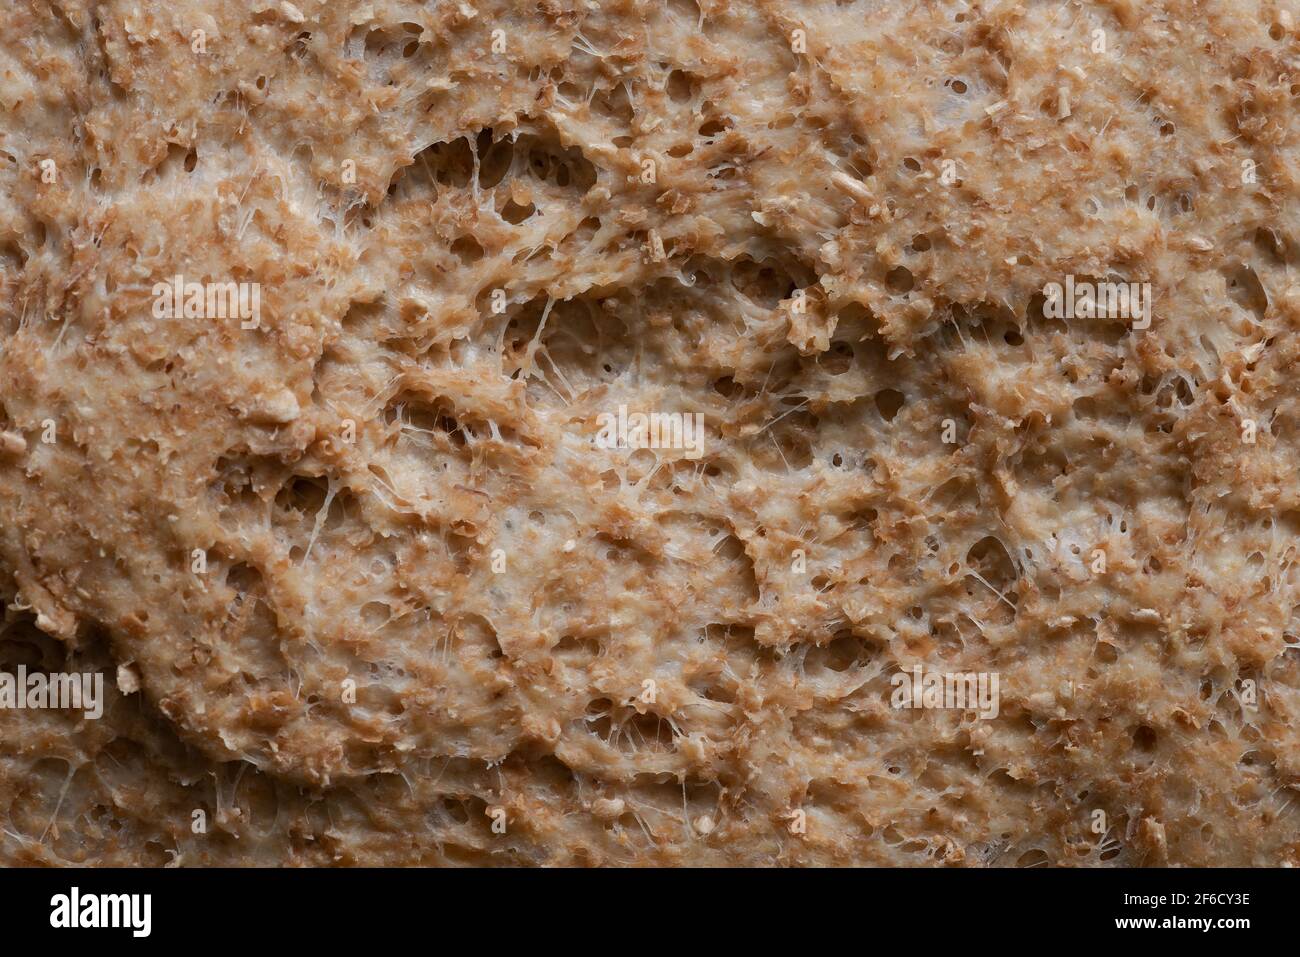 Wholemeal bread crust in stages of being hardened browned by the Maillard reaction with  sugars and amino acids from intense heat at bread surface Stock Photo